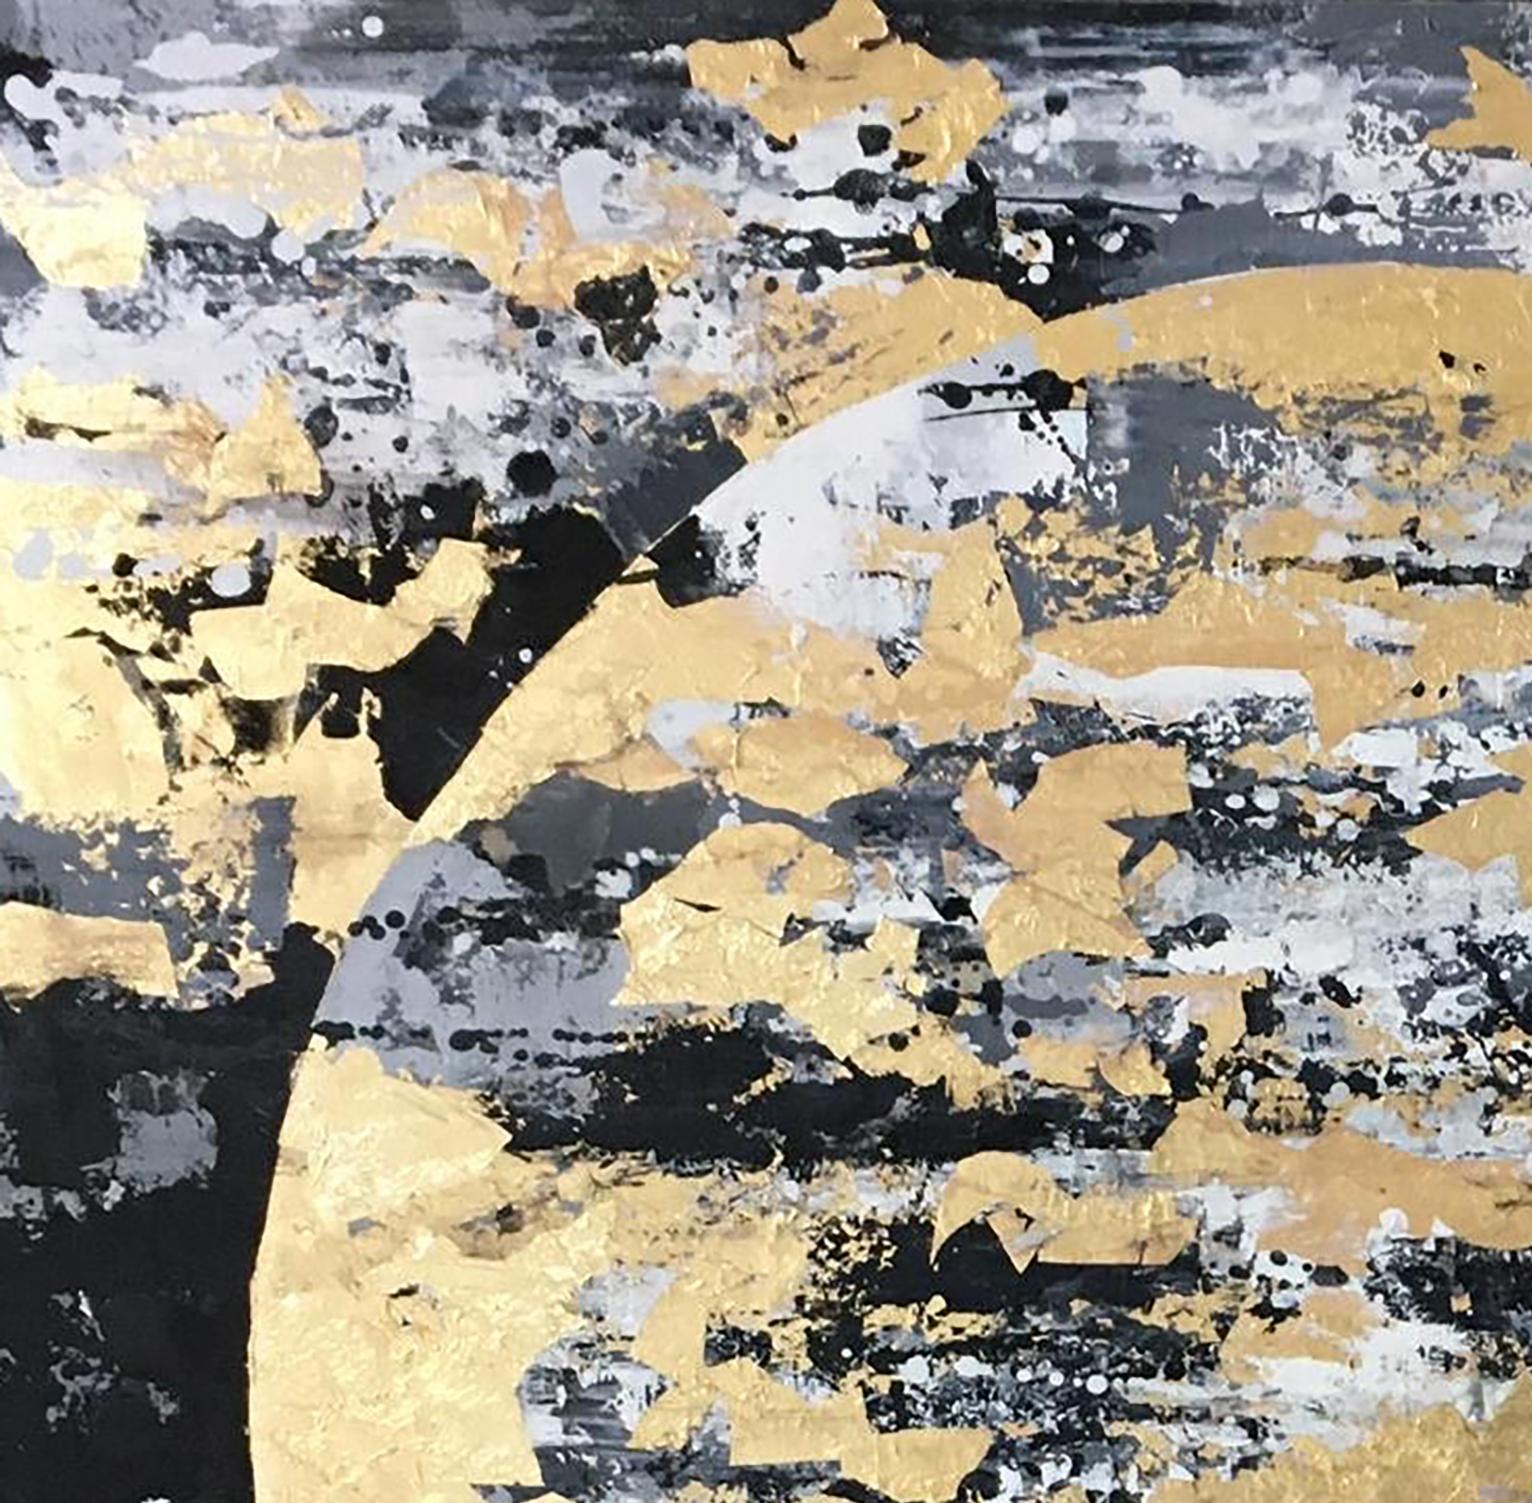 Black And Gold Moon - 21st Century, Contemporary, Painting, Gold Leaf, Moon 2